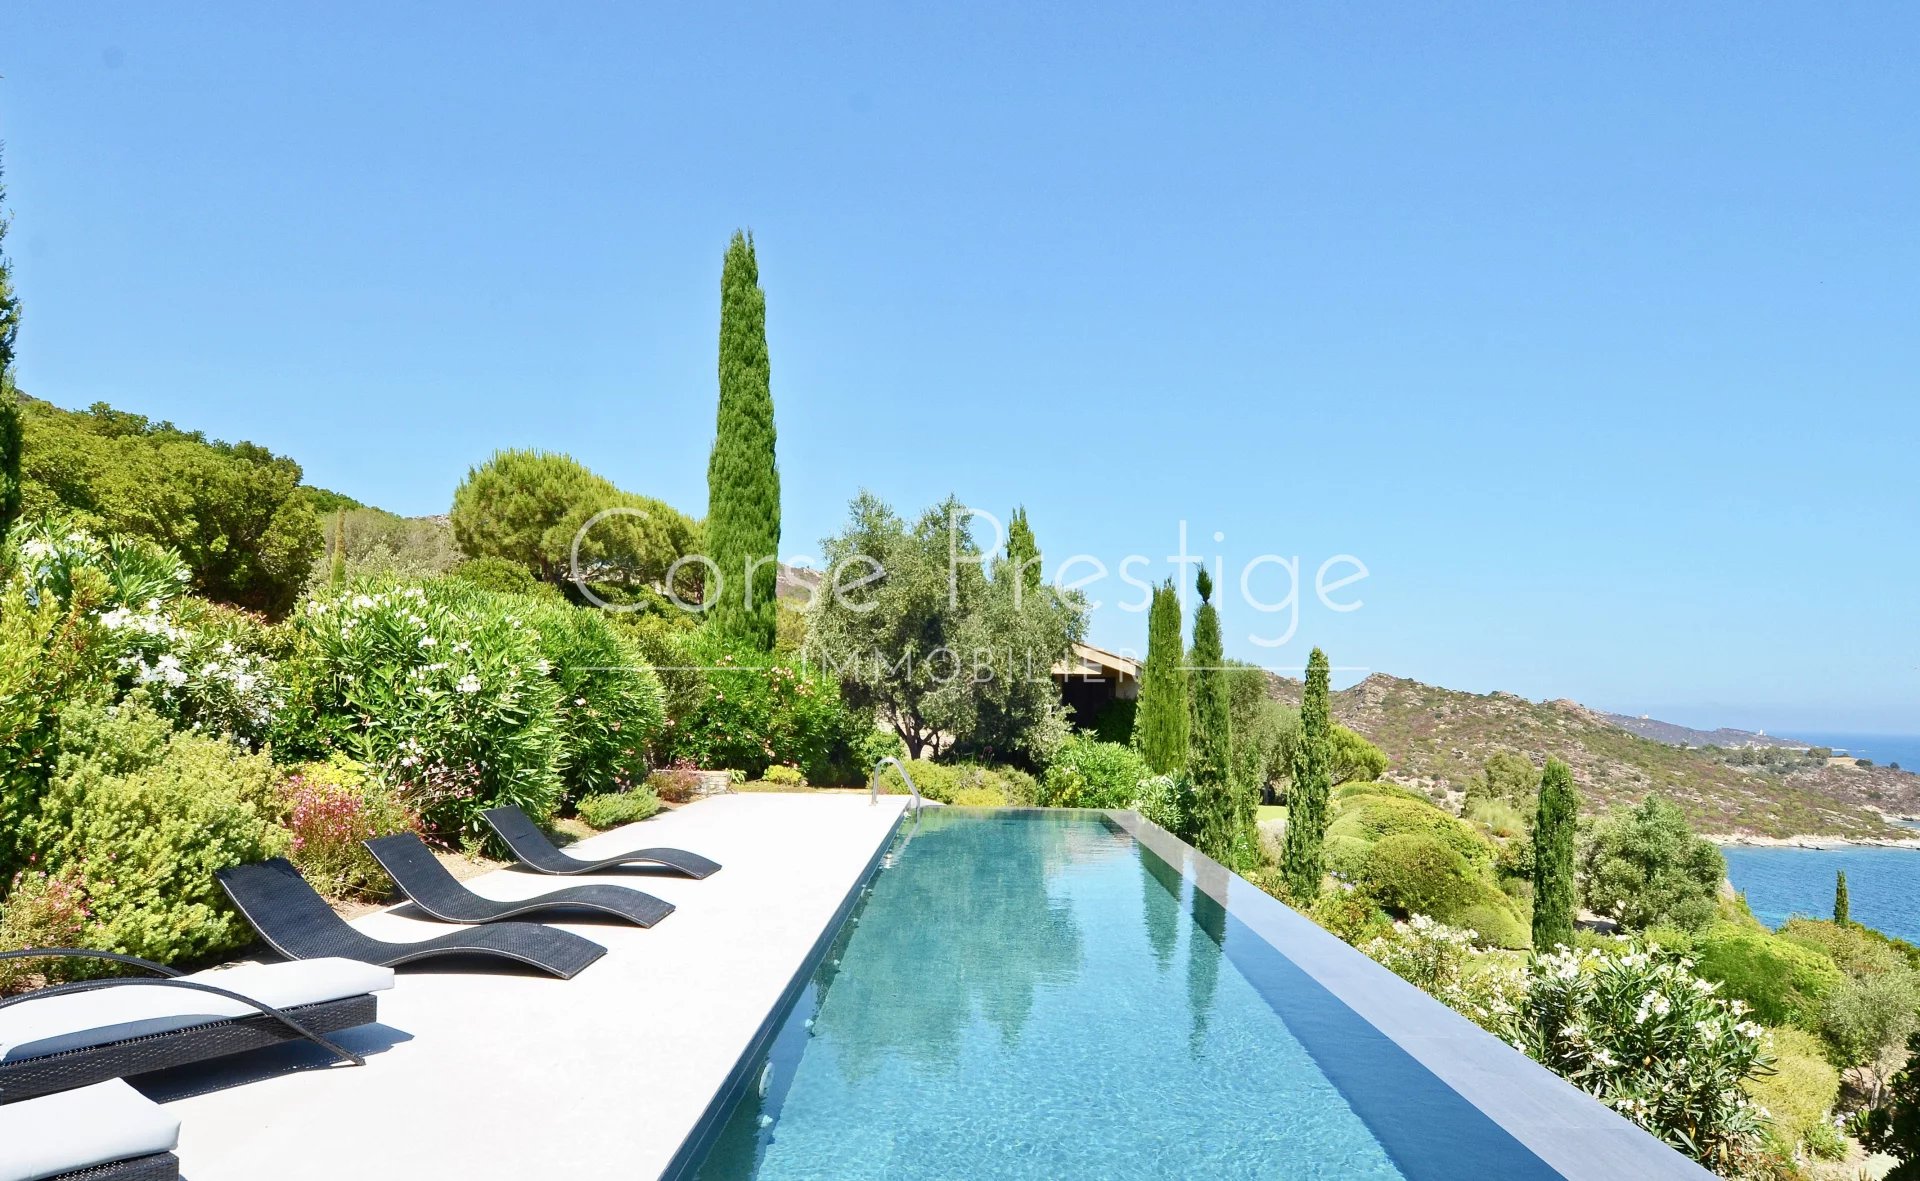 villa for rent in saint florent - dierct access to the sea image1